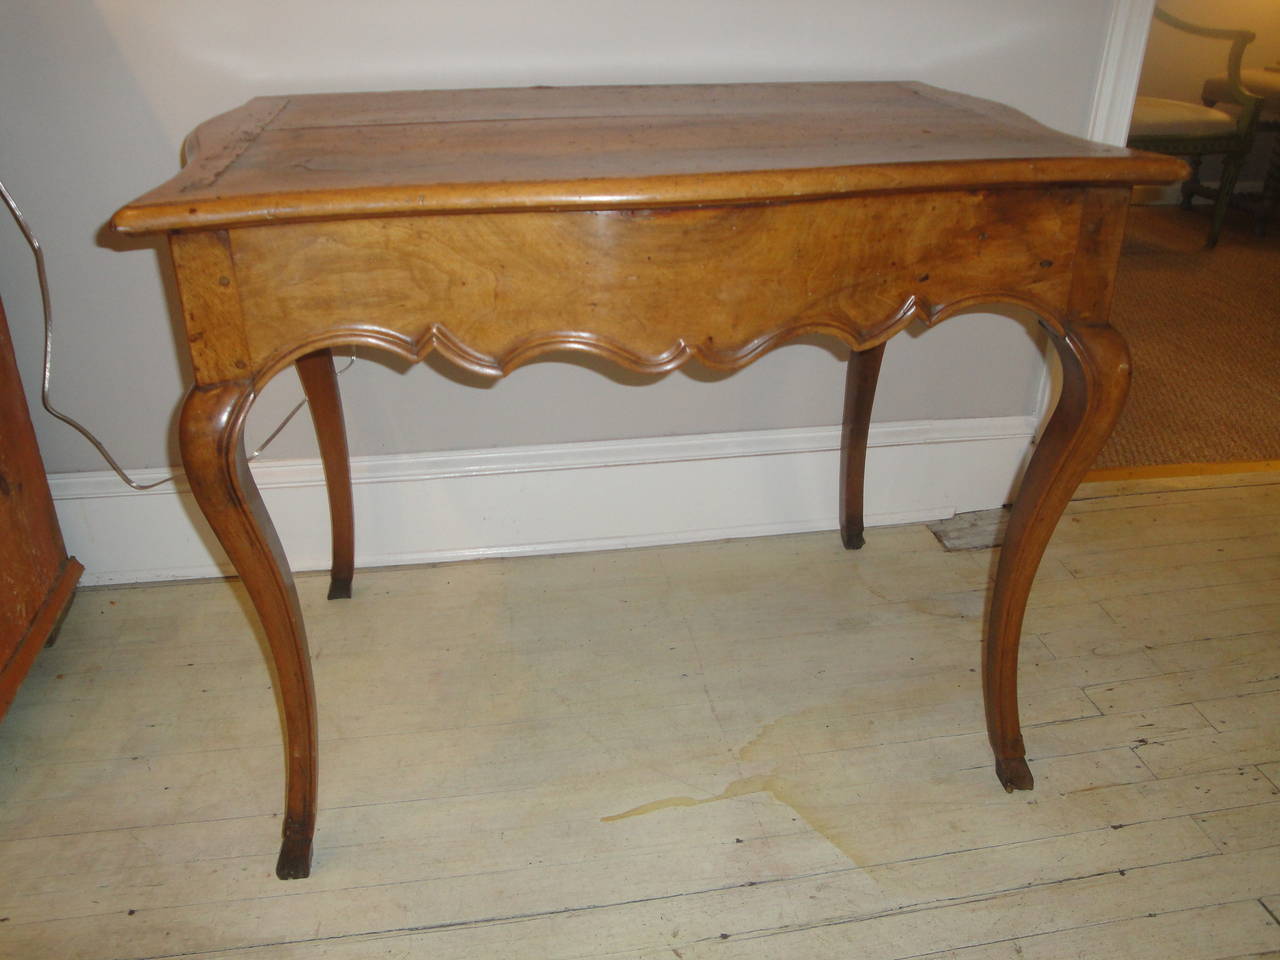 18th century French table milieu in walnut with two drawers, shaped apron and cabriole legs.